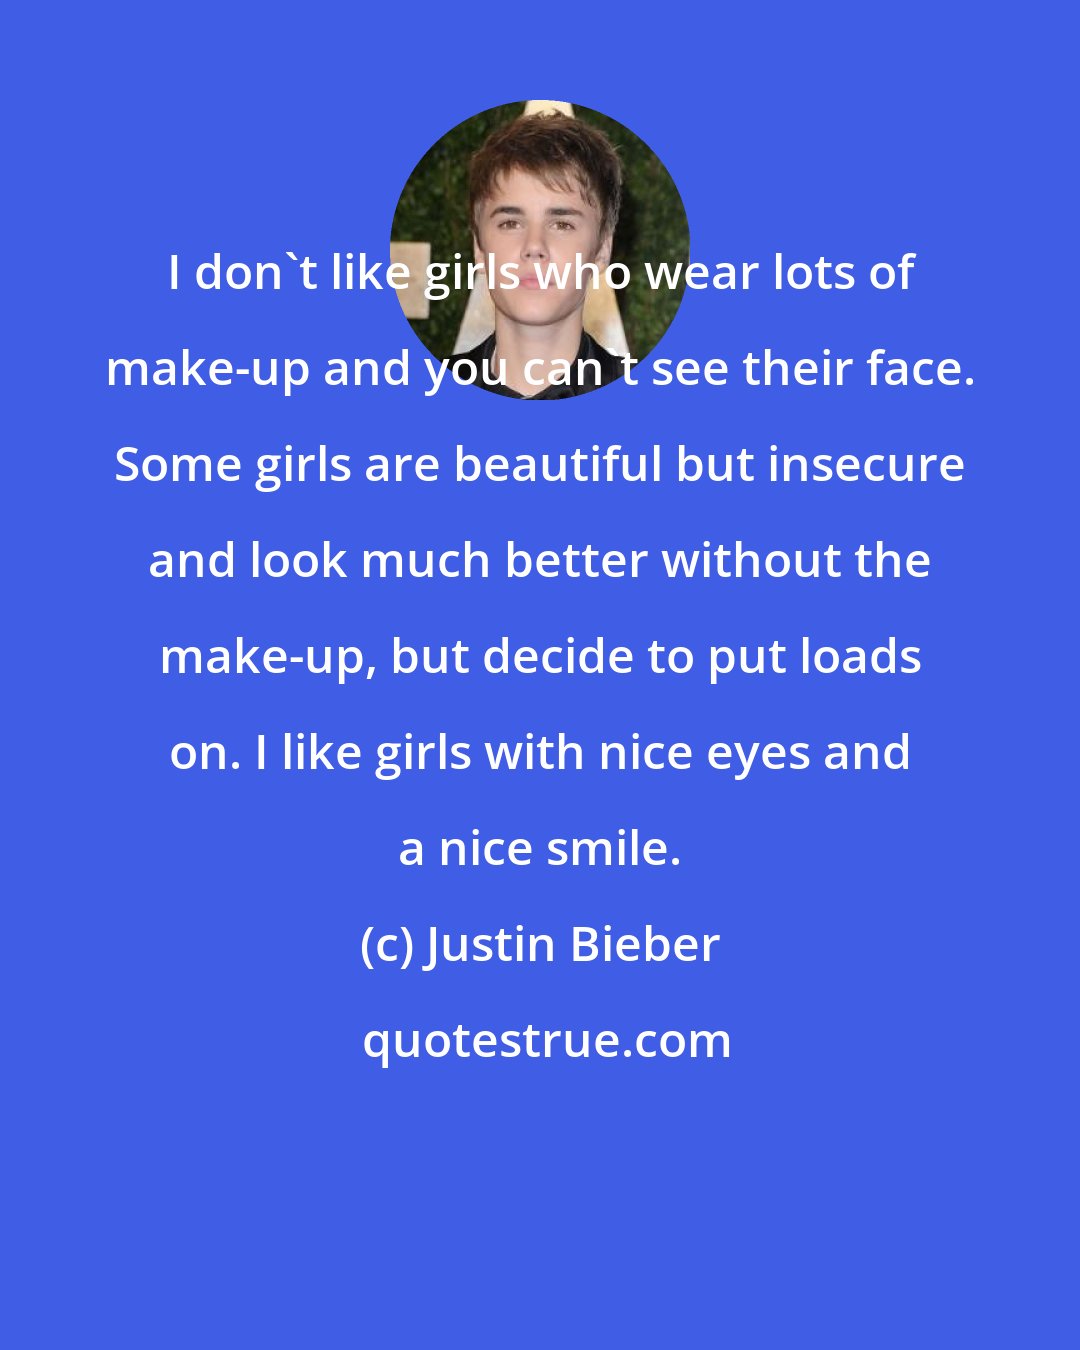 Justin Bieber: I don't like girls who wear lots of make-up and you can't see their face. Some girls are beautiful but insecure and look much better without the make-up, but decide to put loads on. I like girls with nice eyes and a nice smile.